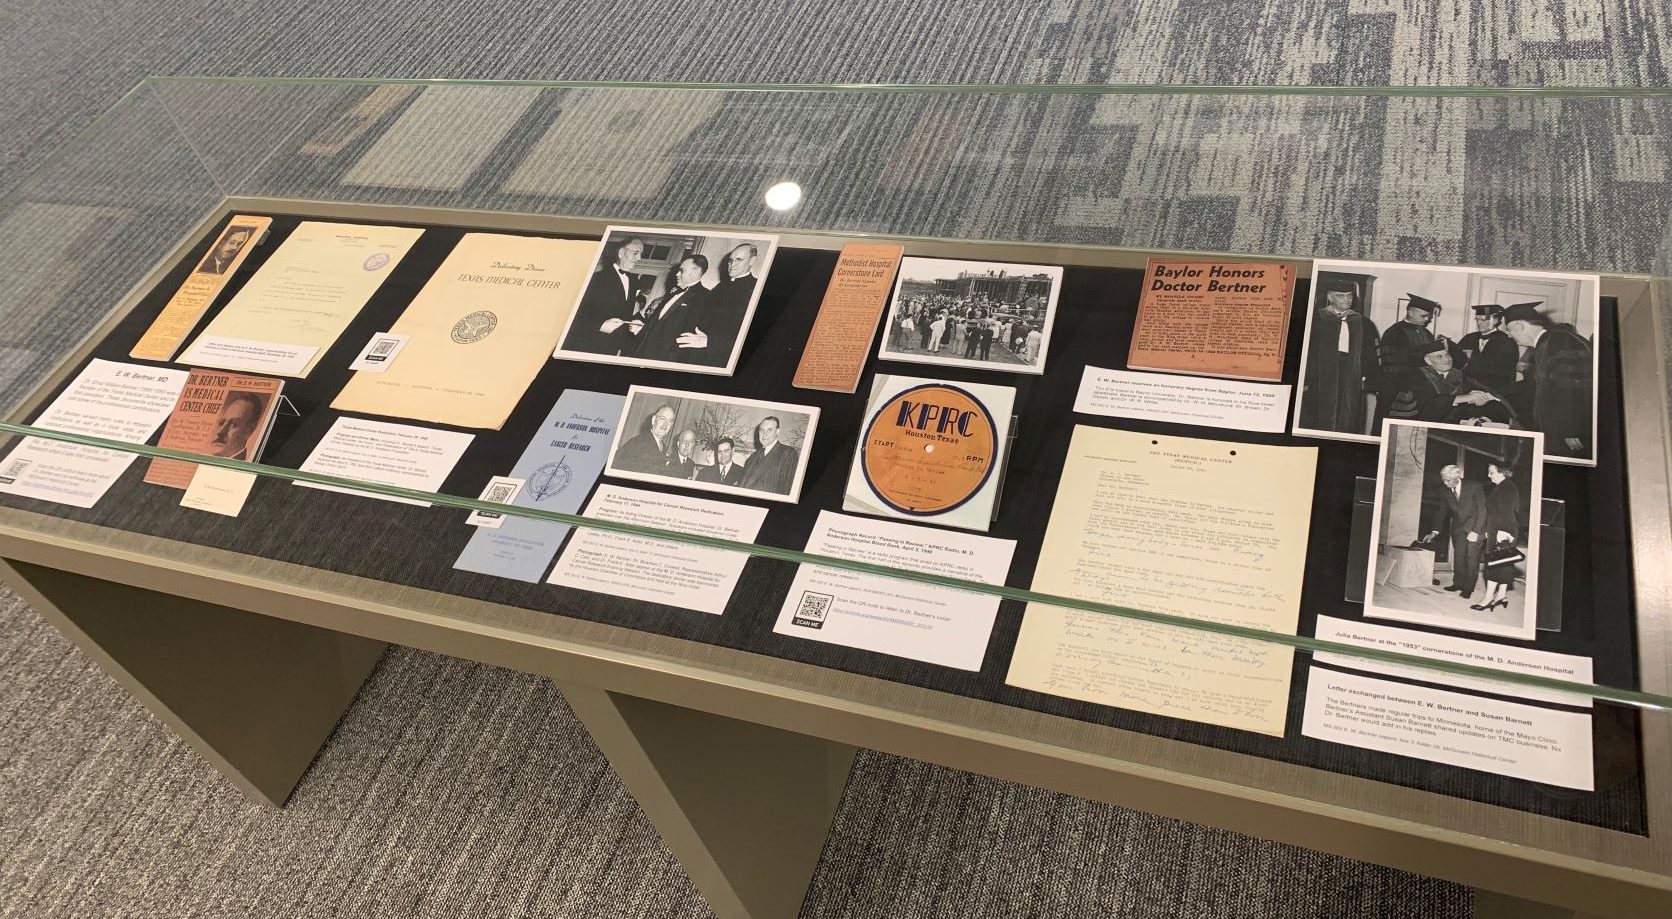 The first case in the exhibit features archival materials highlighting Dr. Bertner's professional contributions to the Texas Medical Center. 